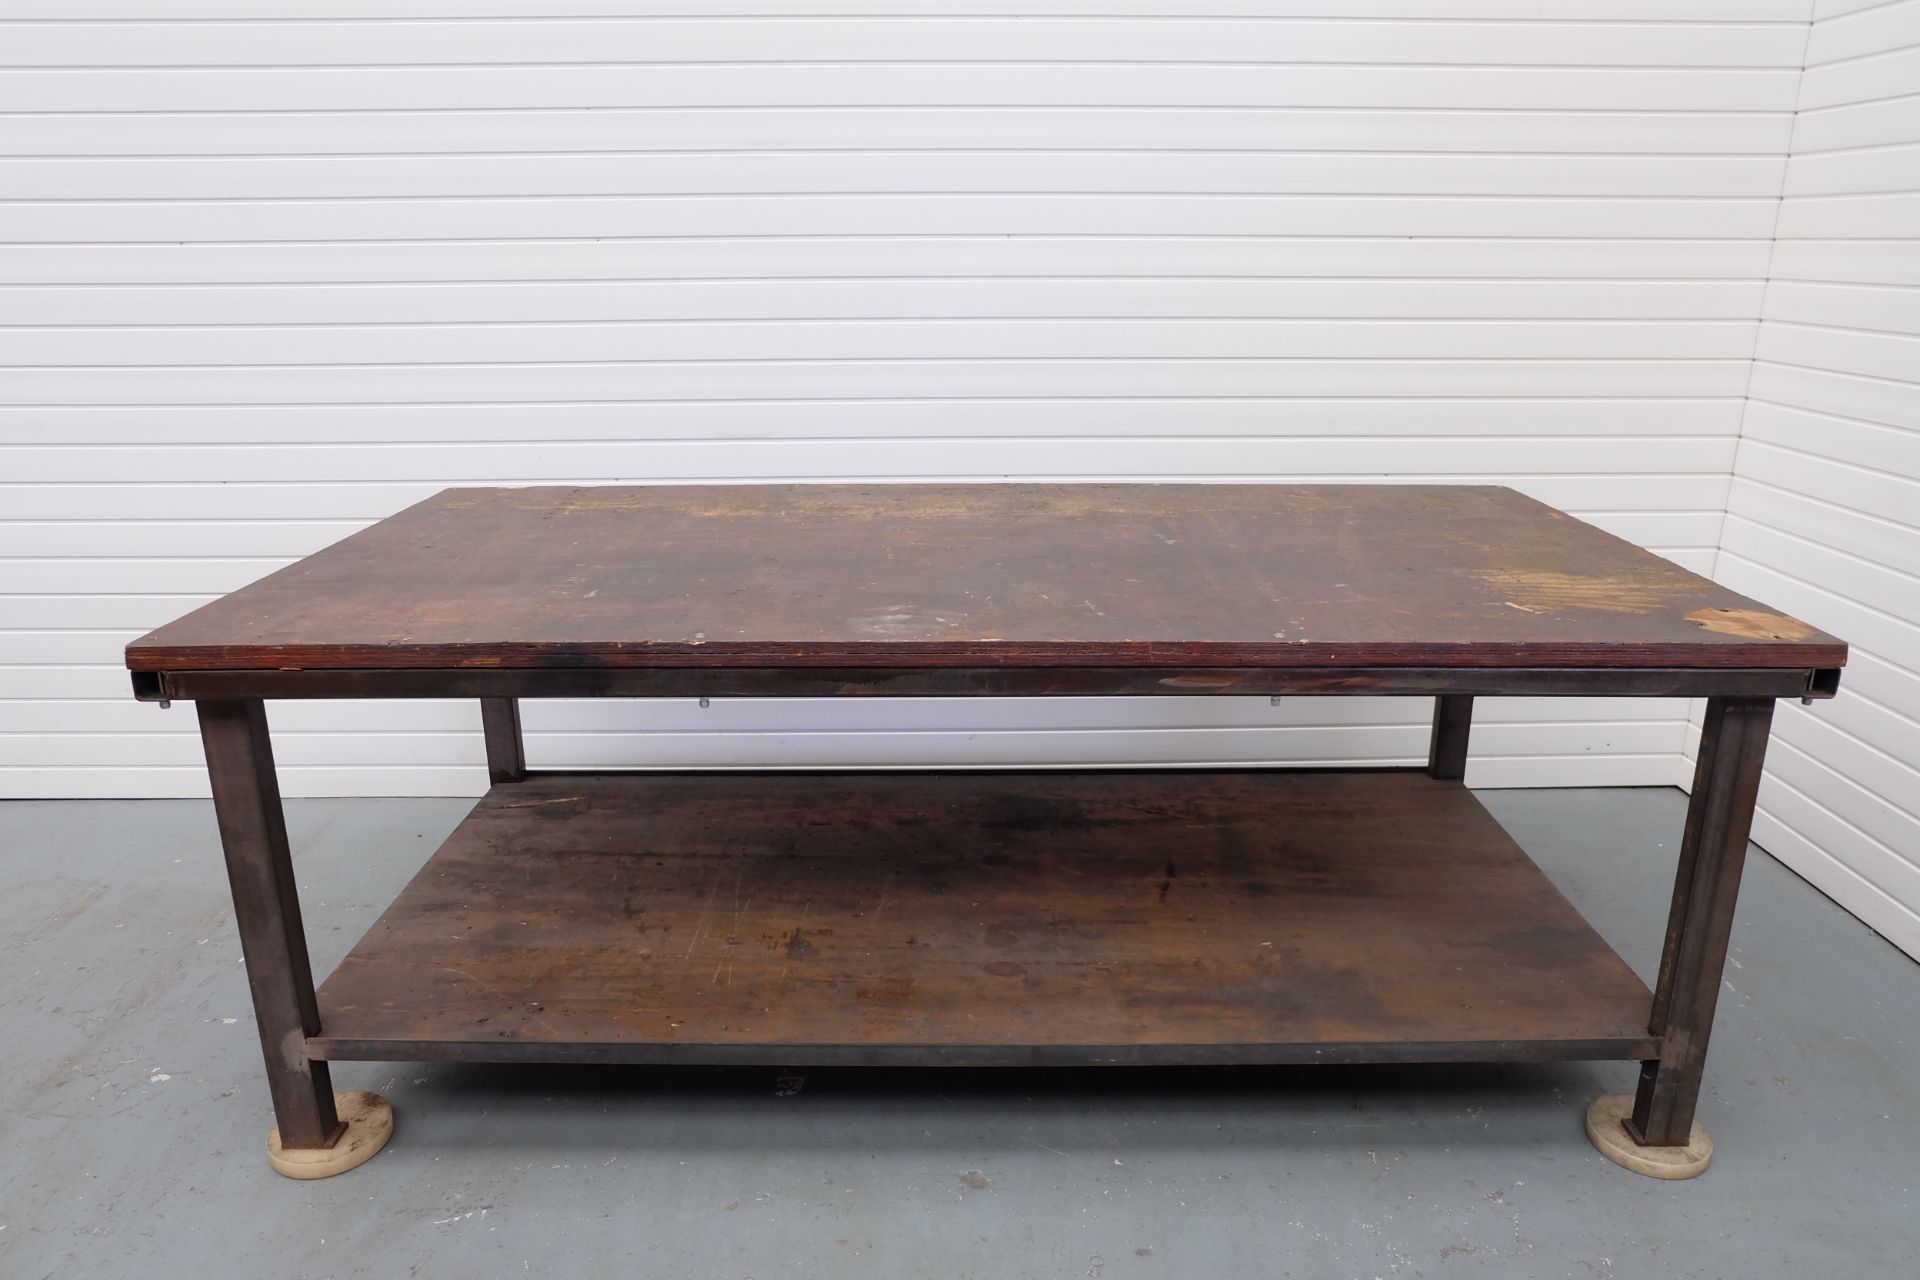 Heavy Duty Work Bench. Steel Frame With 1 1/2" Wooden Top. Size 8' x 4'. Height 35".